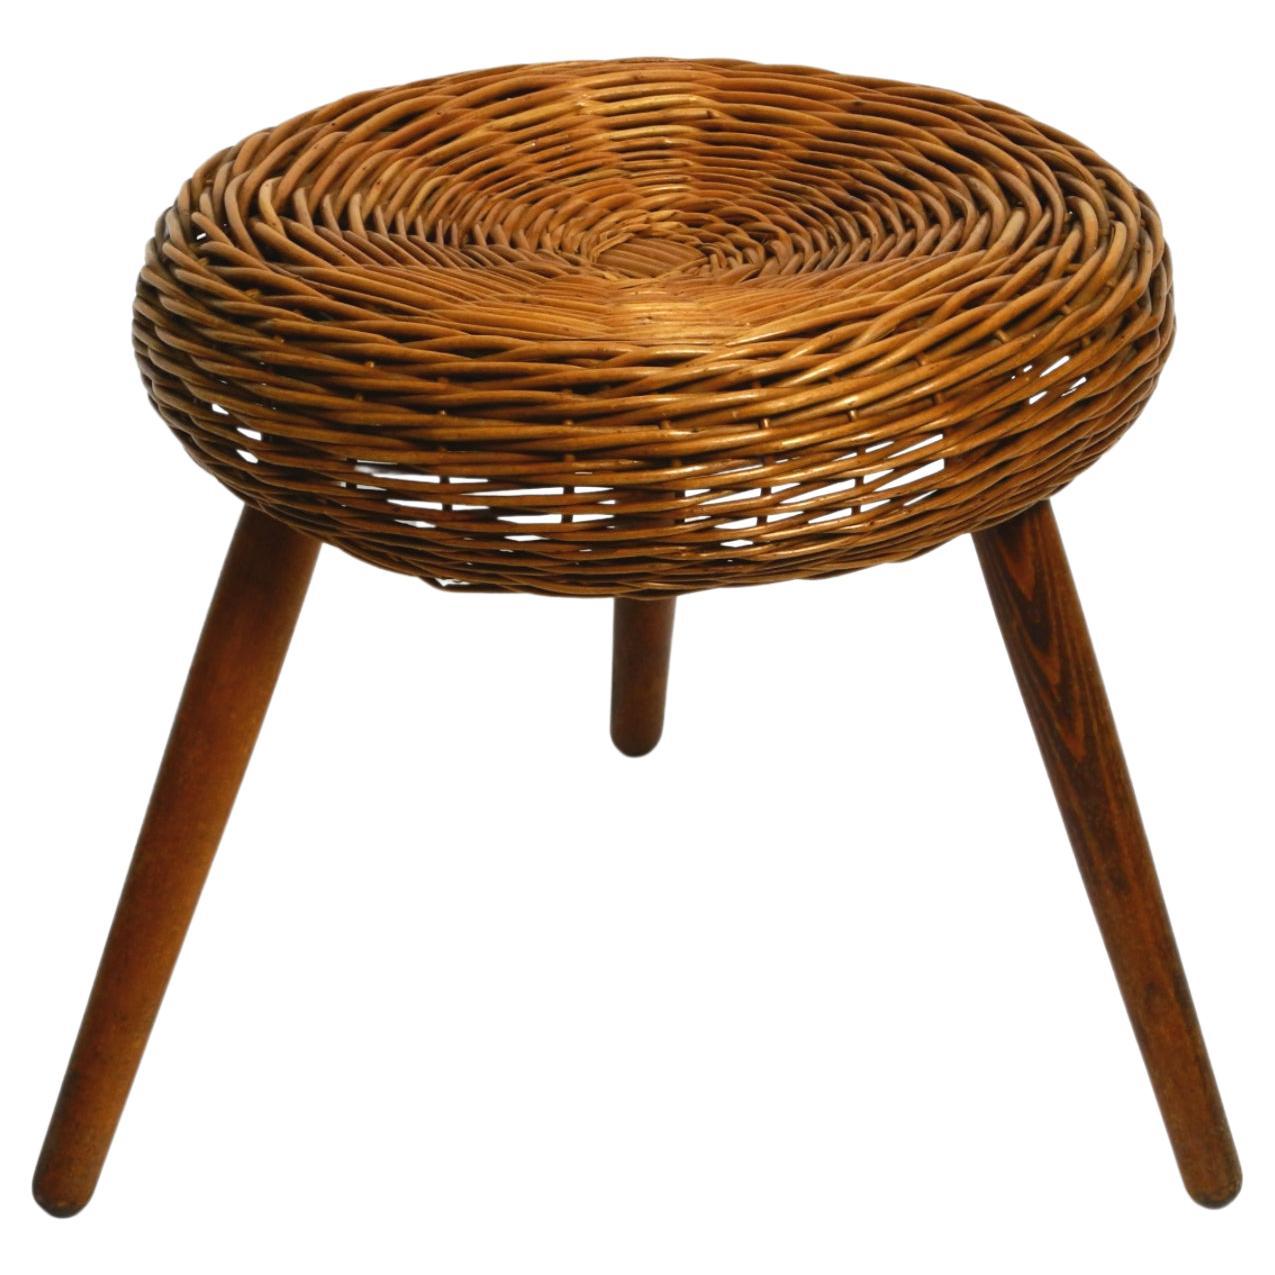 Original large Mid Century Modern rattan stool with wooden legs by Tony Paul For Sale